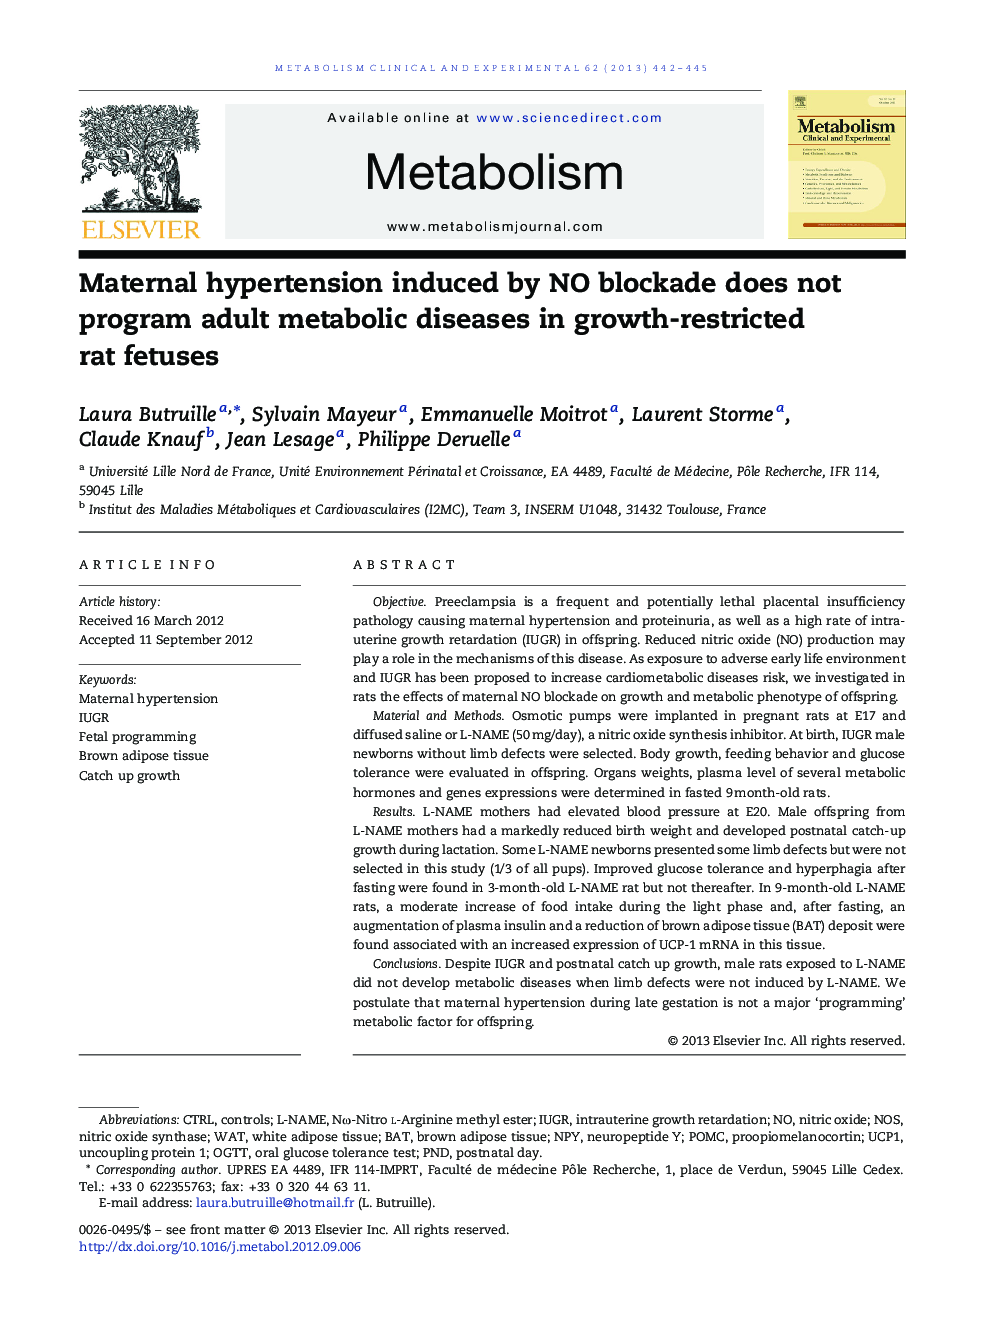 Maternal hypertension induced by NO blockade does not program adult metabolic diseases in growth-restricted rat fetuses